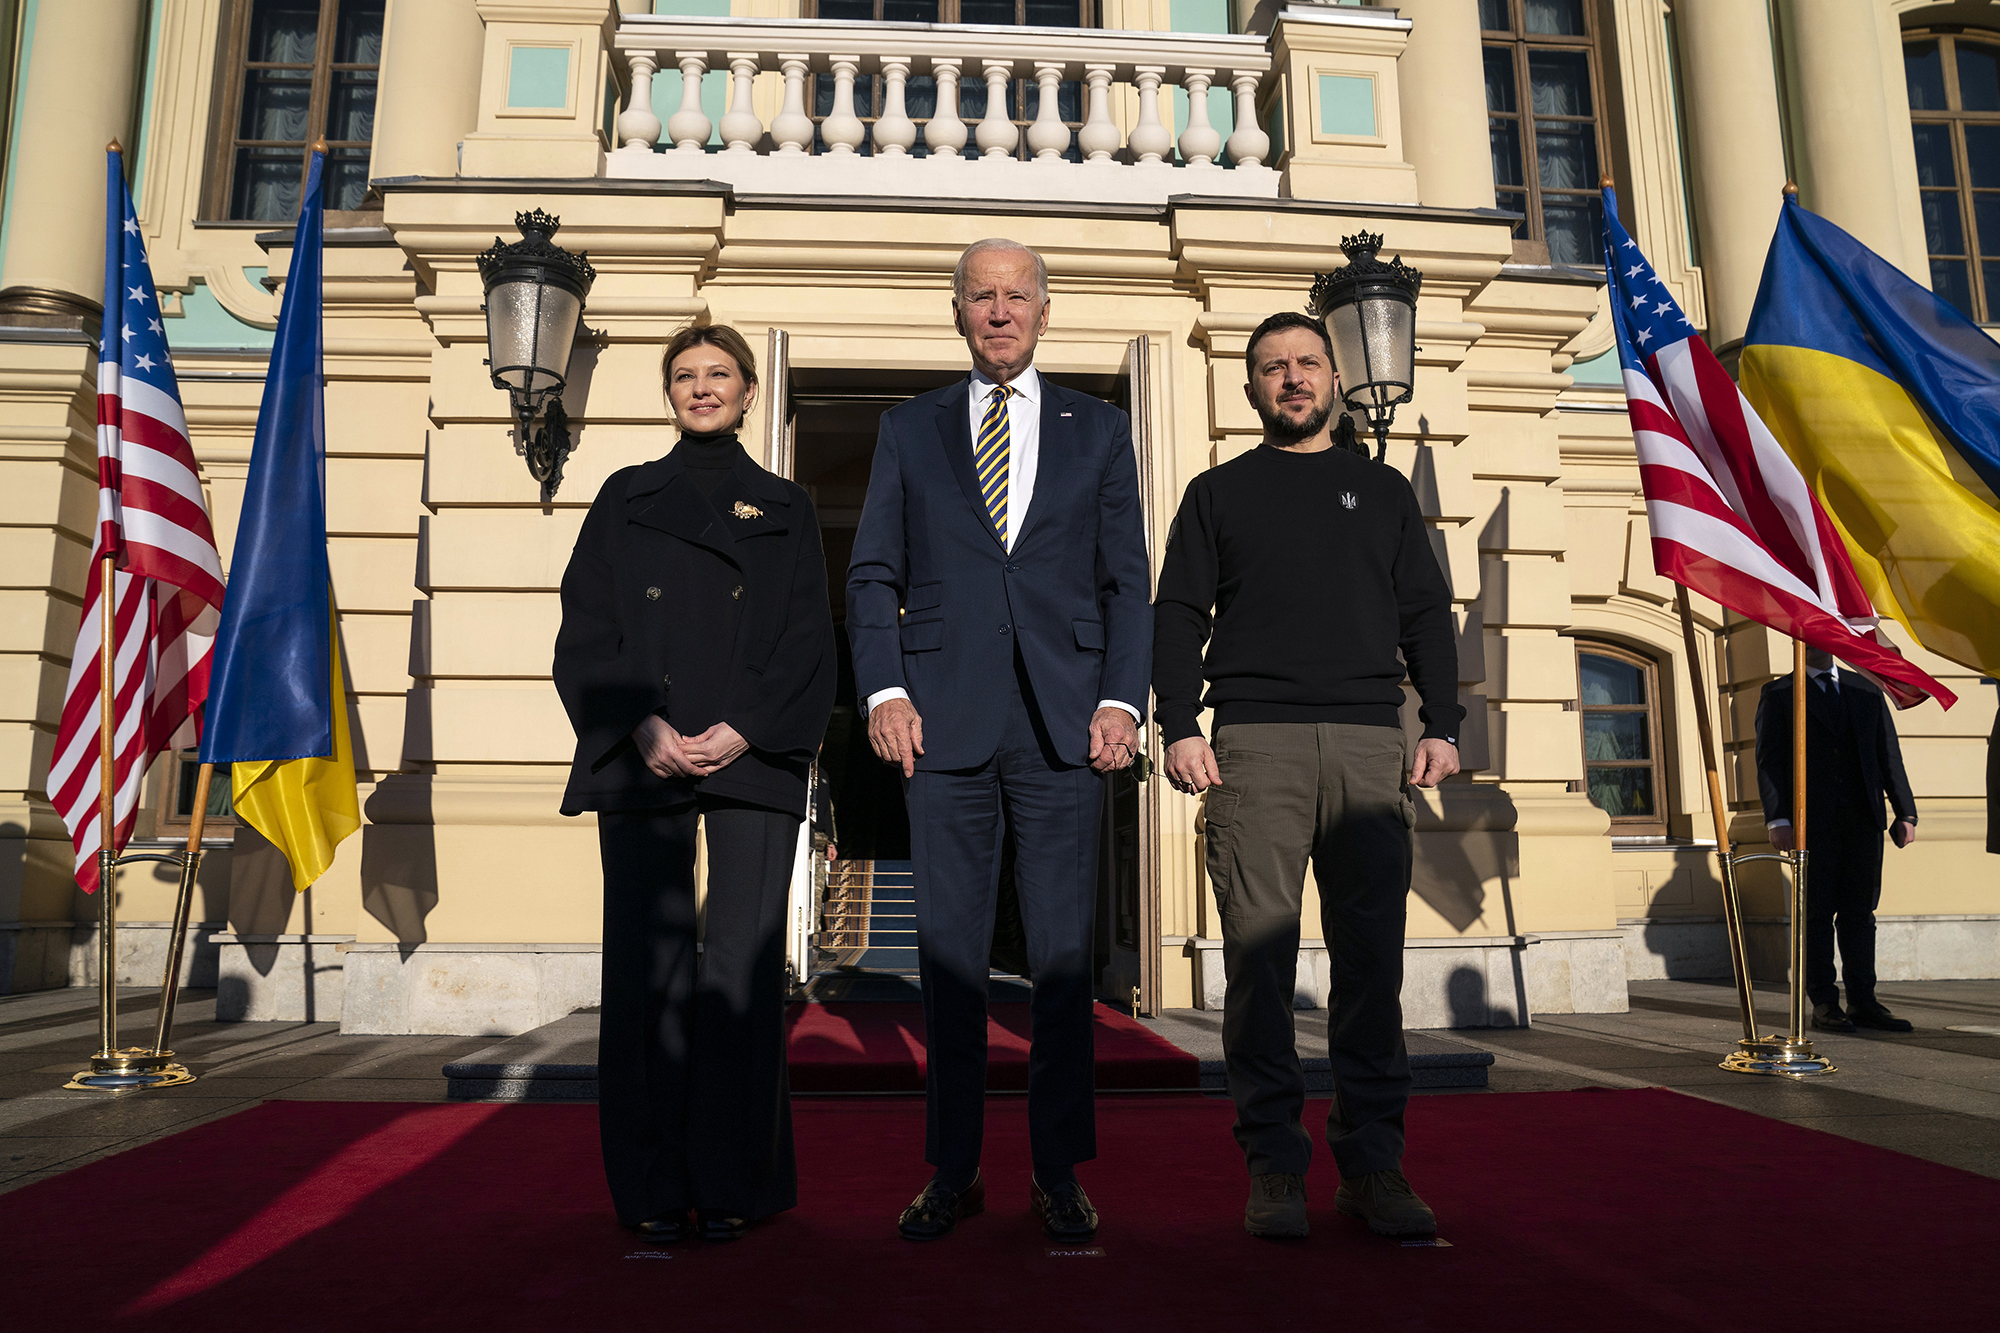 Biden poses with Ukrainian counterpart Zelensky and first lady Olena Zelenska at Mariinsky Palace during the unannounced visit on February 20.